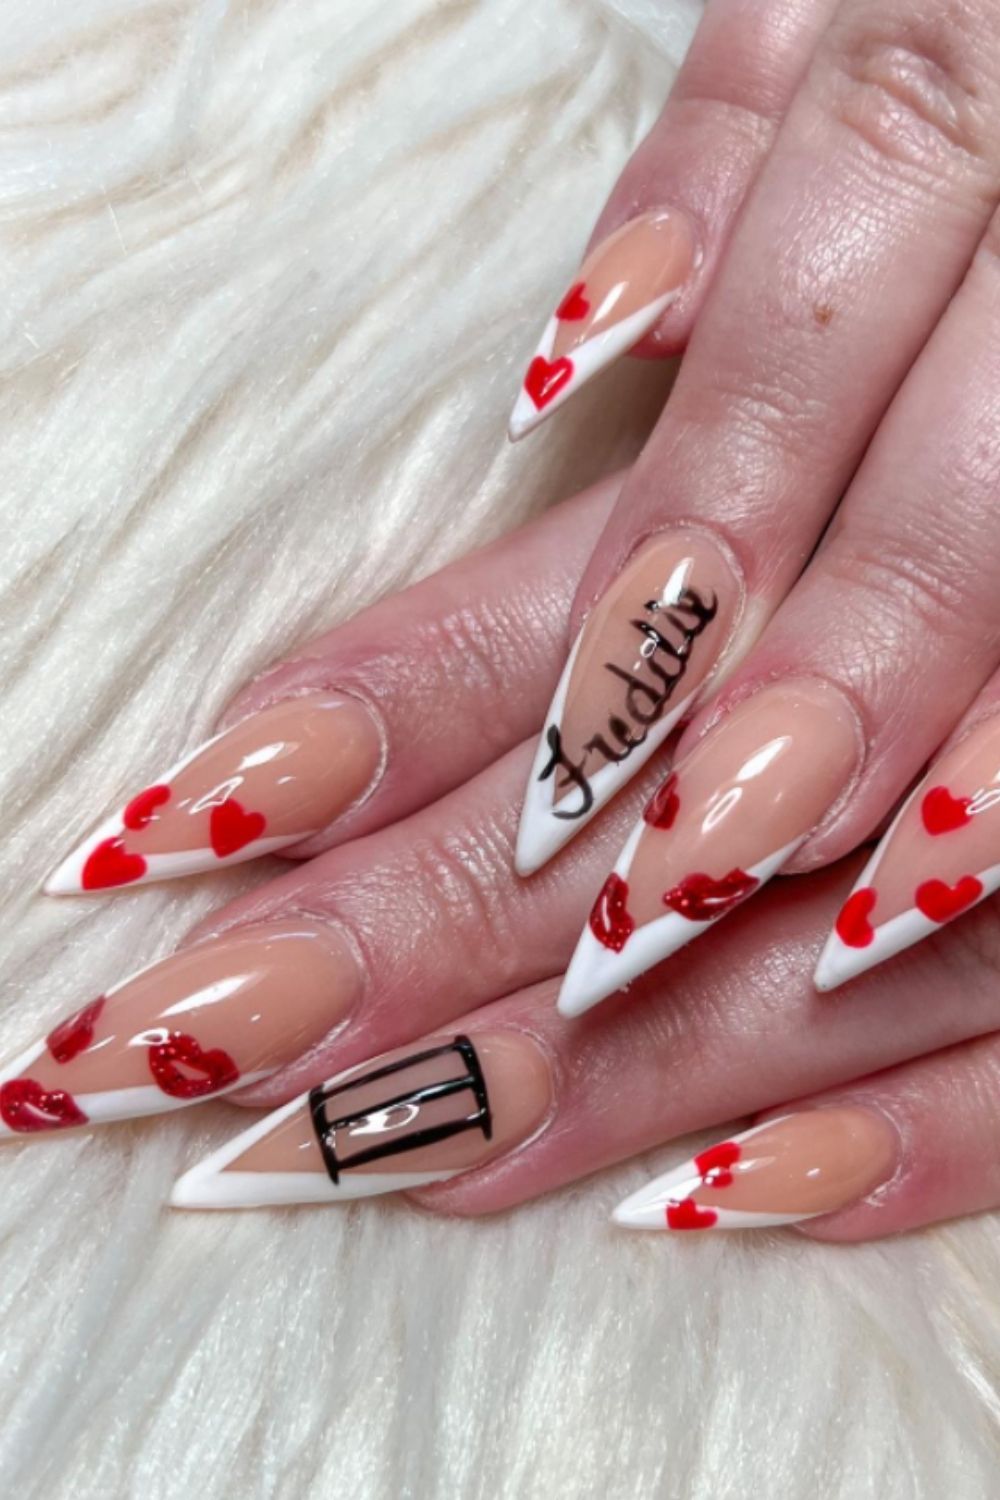 White tip almond nail designs with red heart